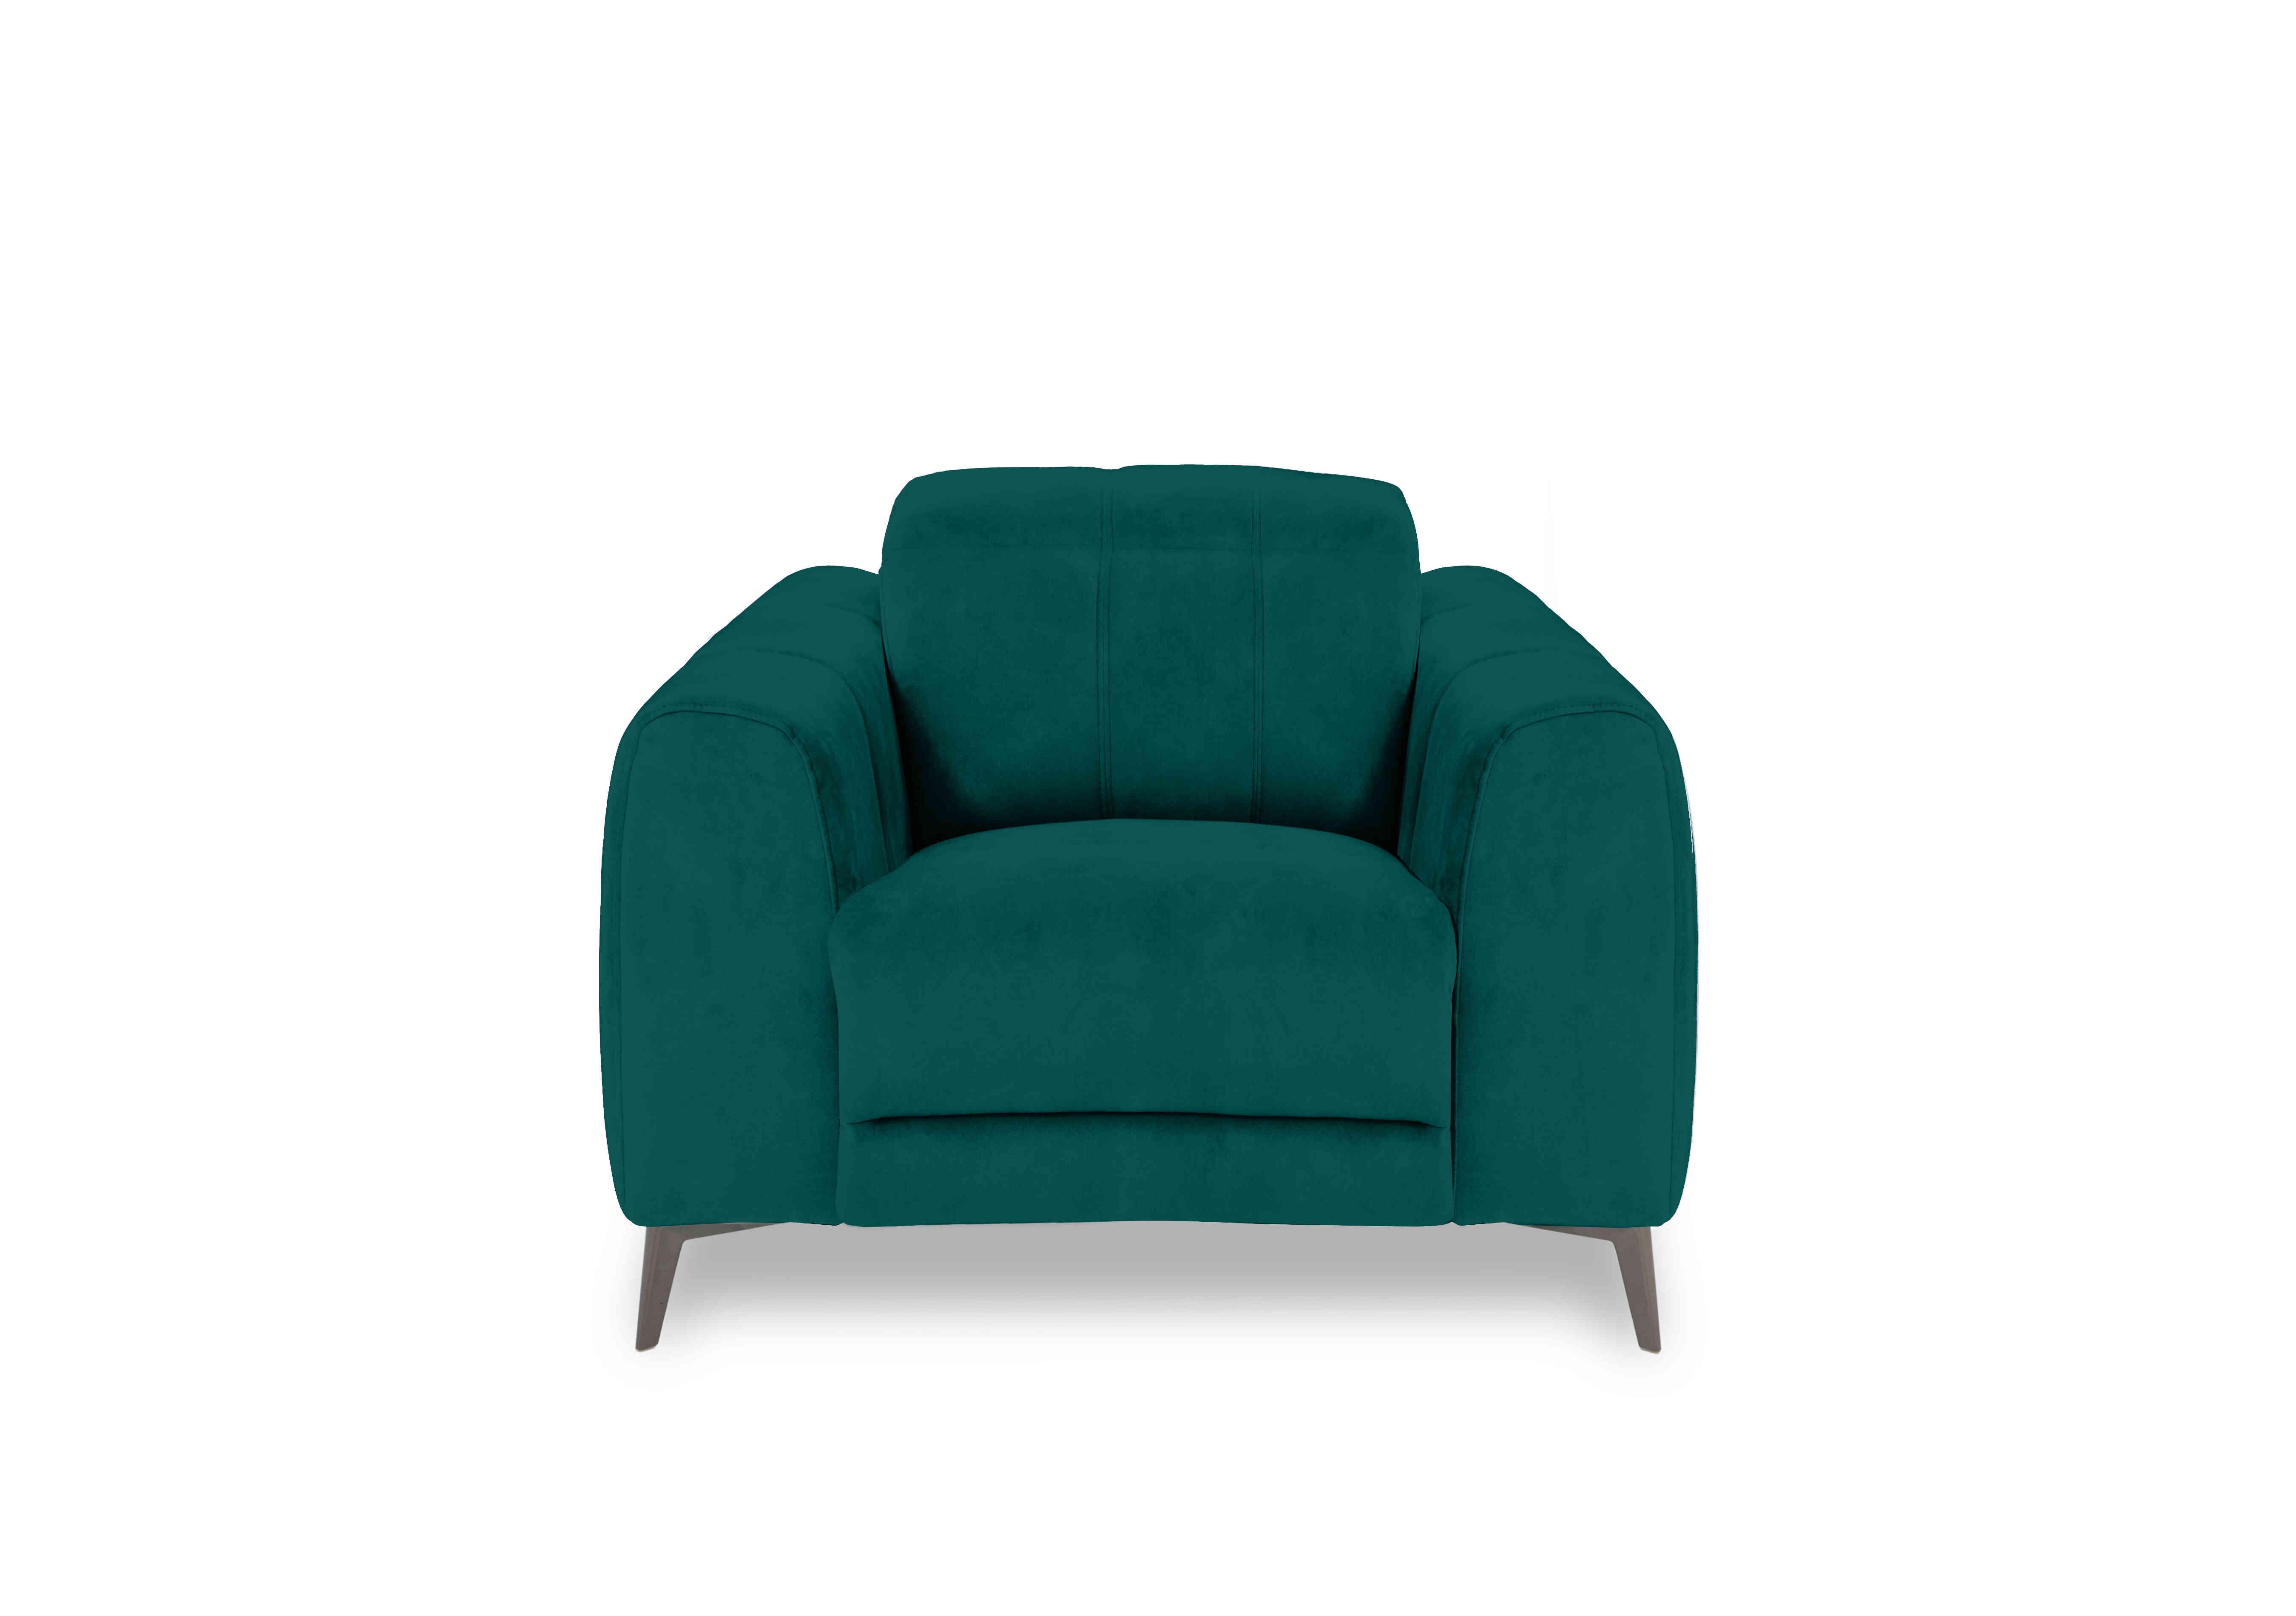 Ezra Fabric Chair in Opulence 51003 Teal on Furniture Village